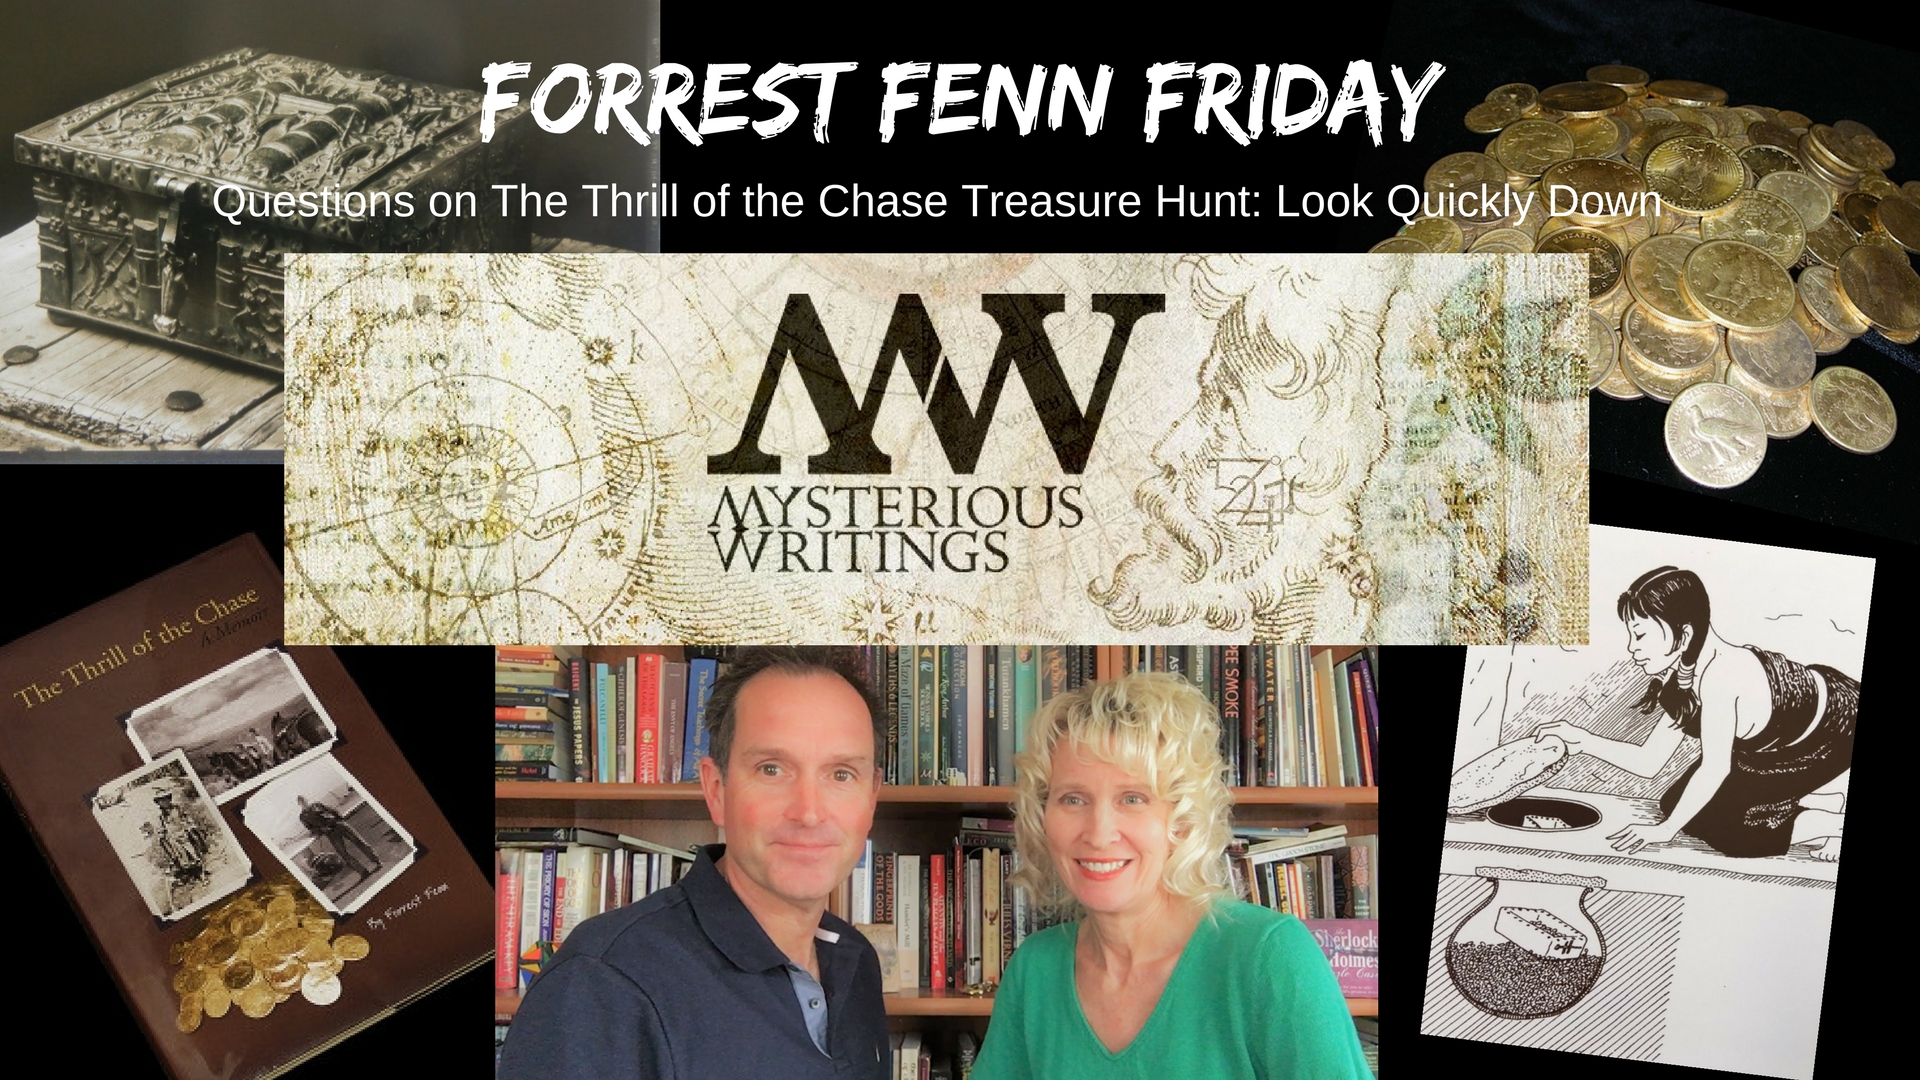 Forrest Fenn Friday: Questions on The Thrill of the Chase Treasure Hunt: Look Quickly Down